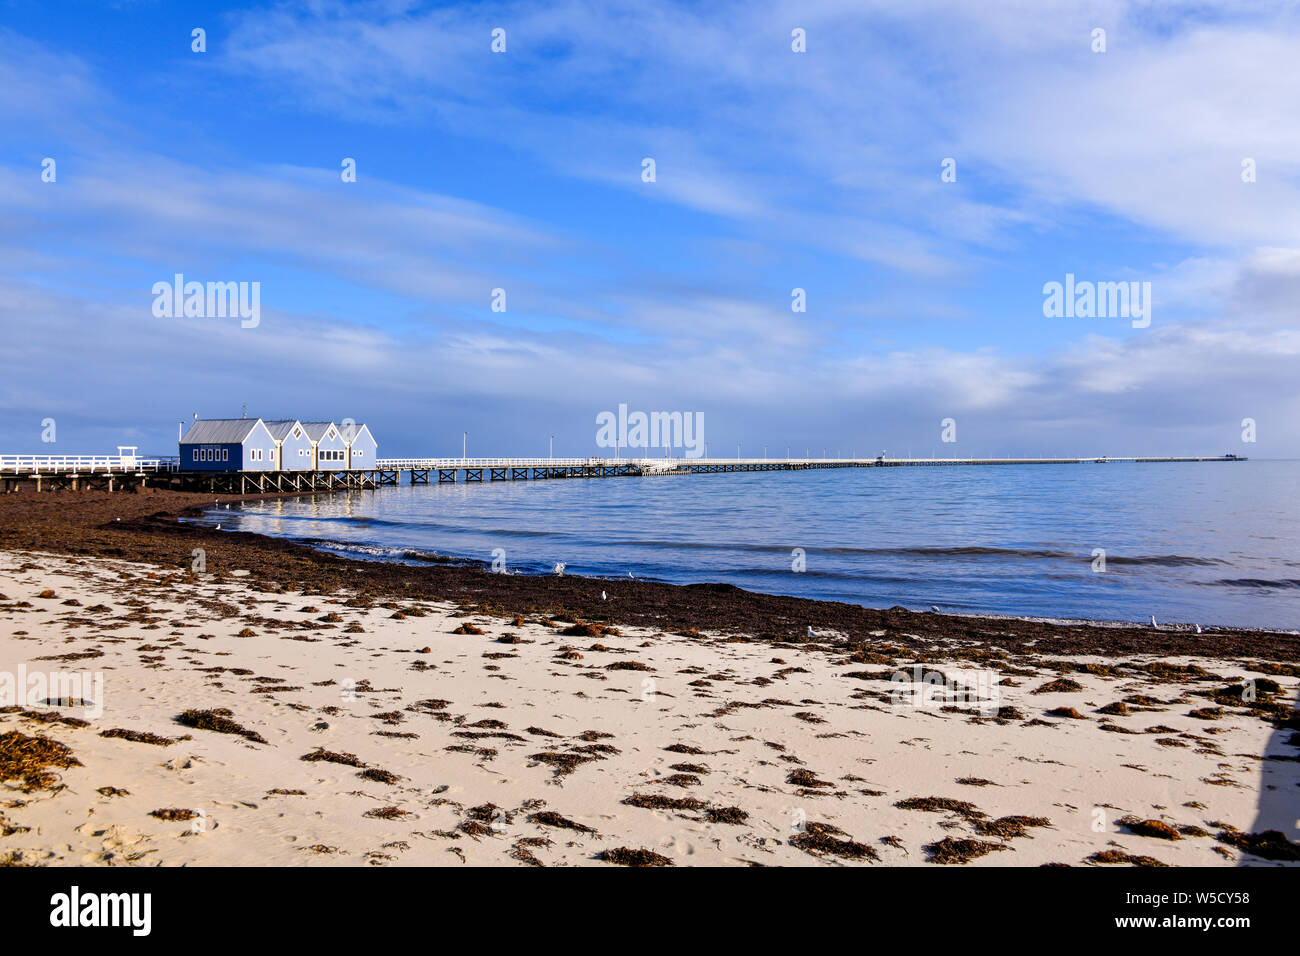 Morning at the jetty stock image. Image of relax, jetty - 32725875